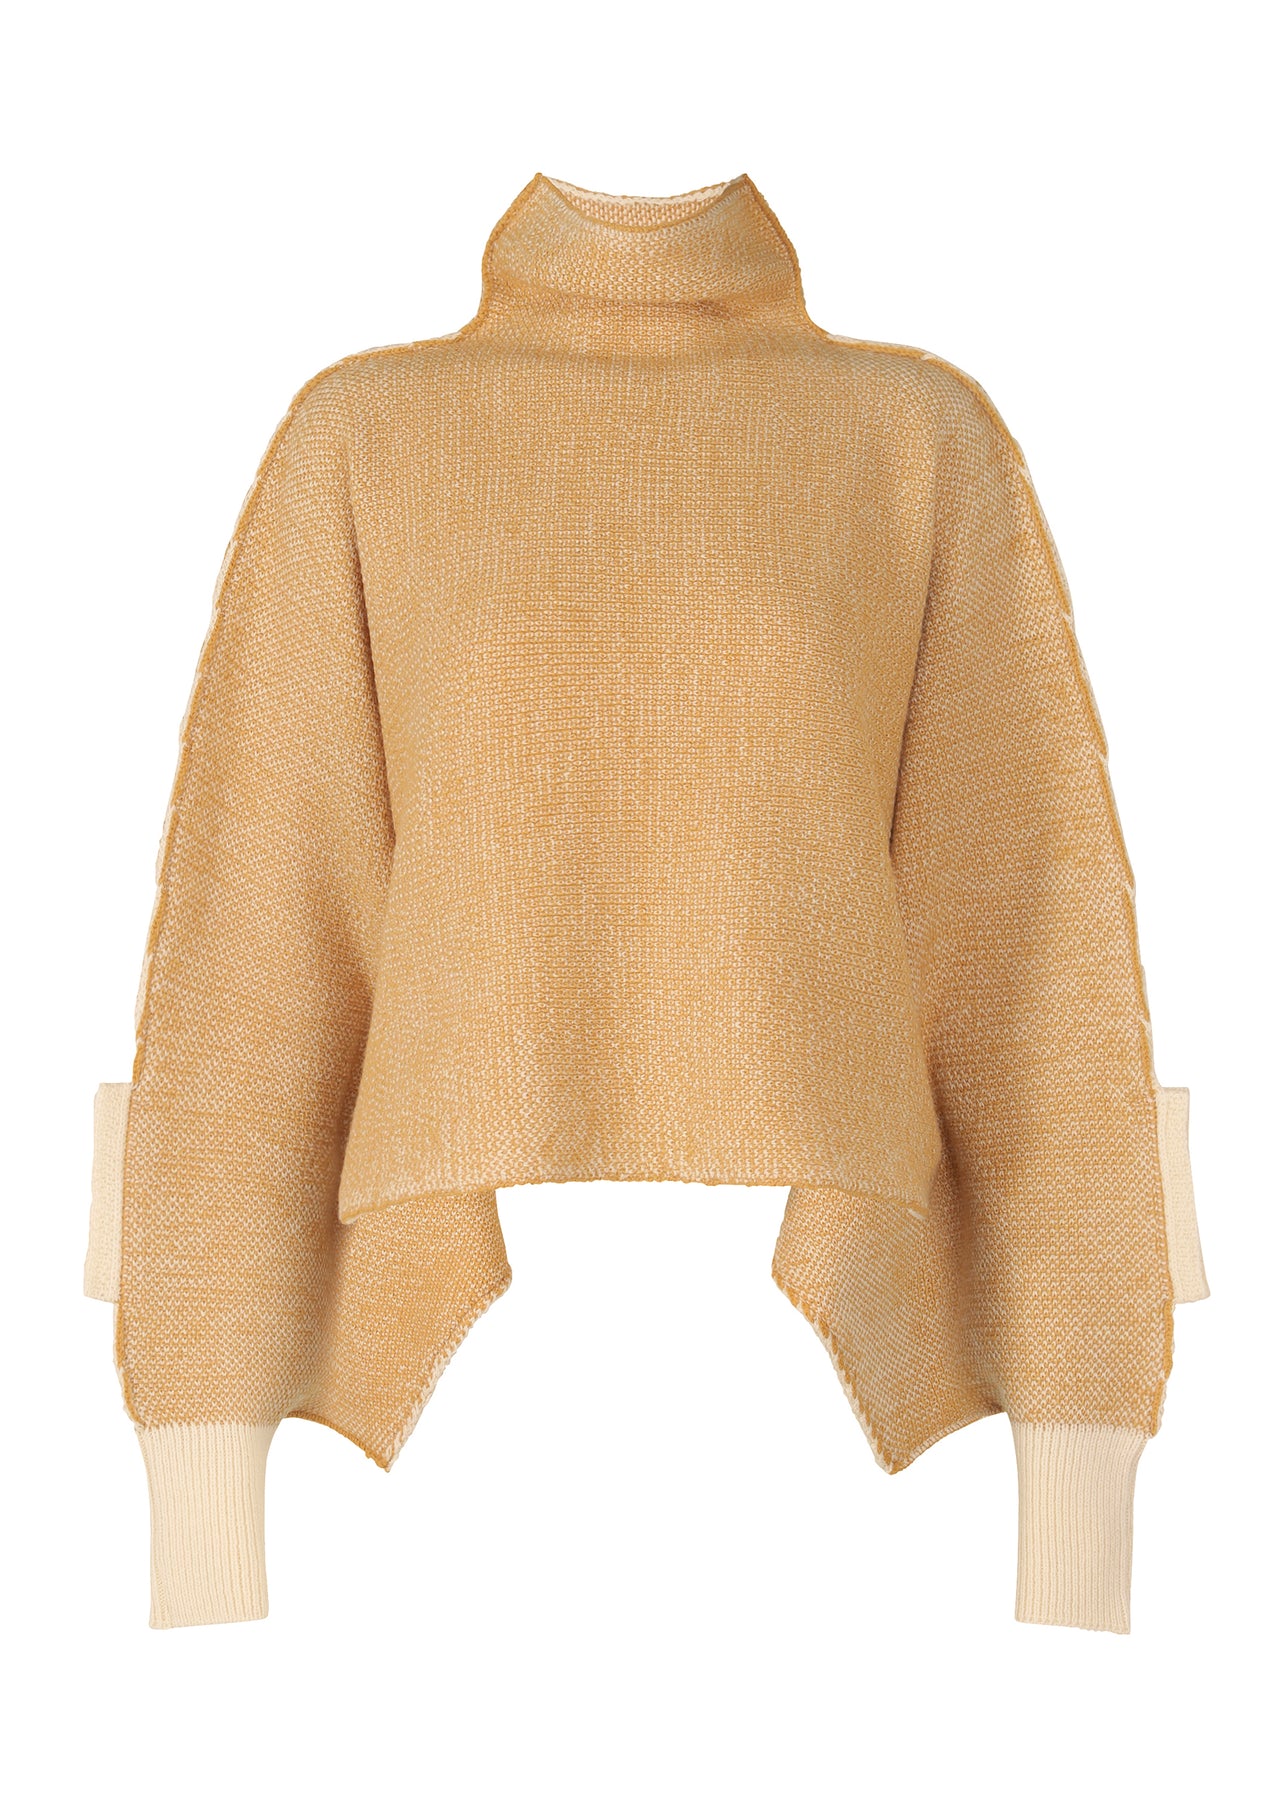 SEED STITCH KNIT TOP | The official ISSEY MIYAKE ONLINE